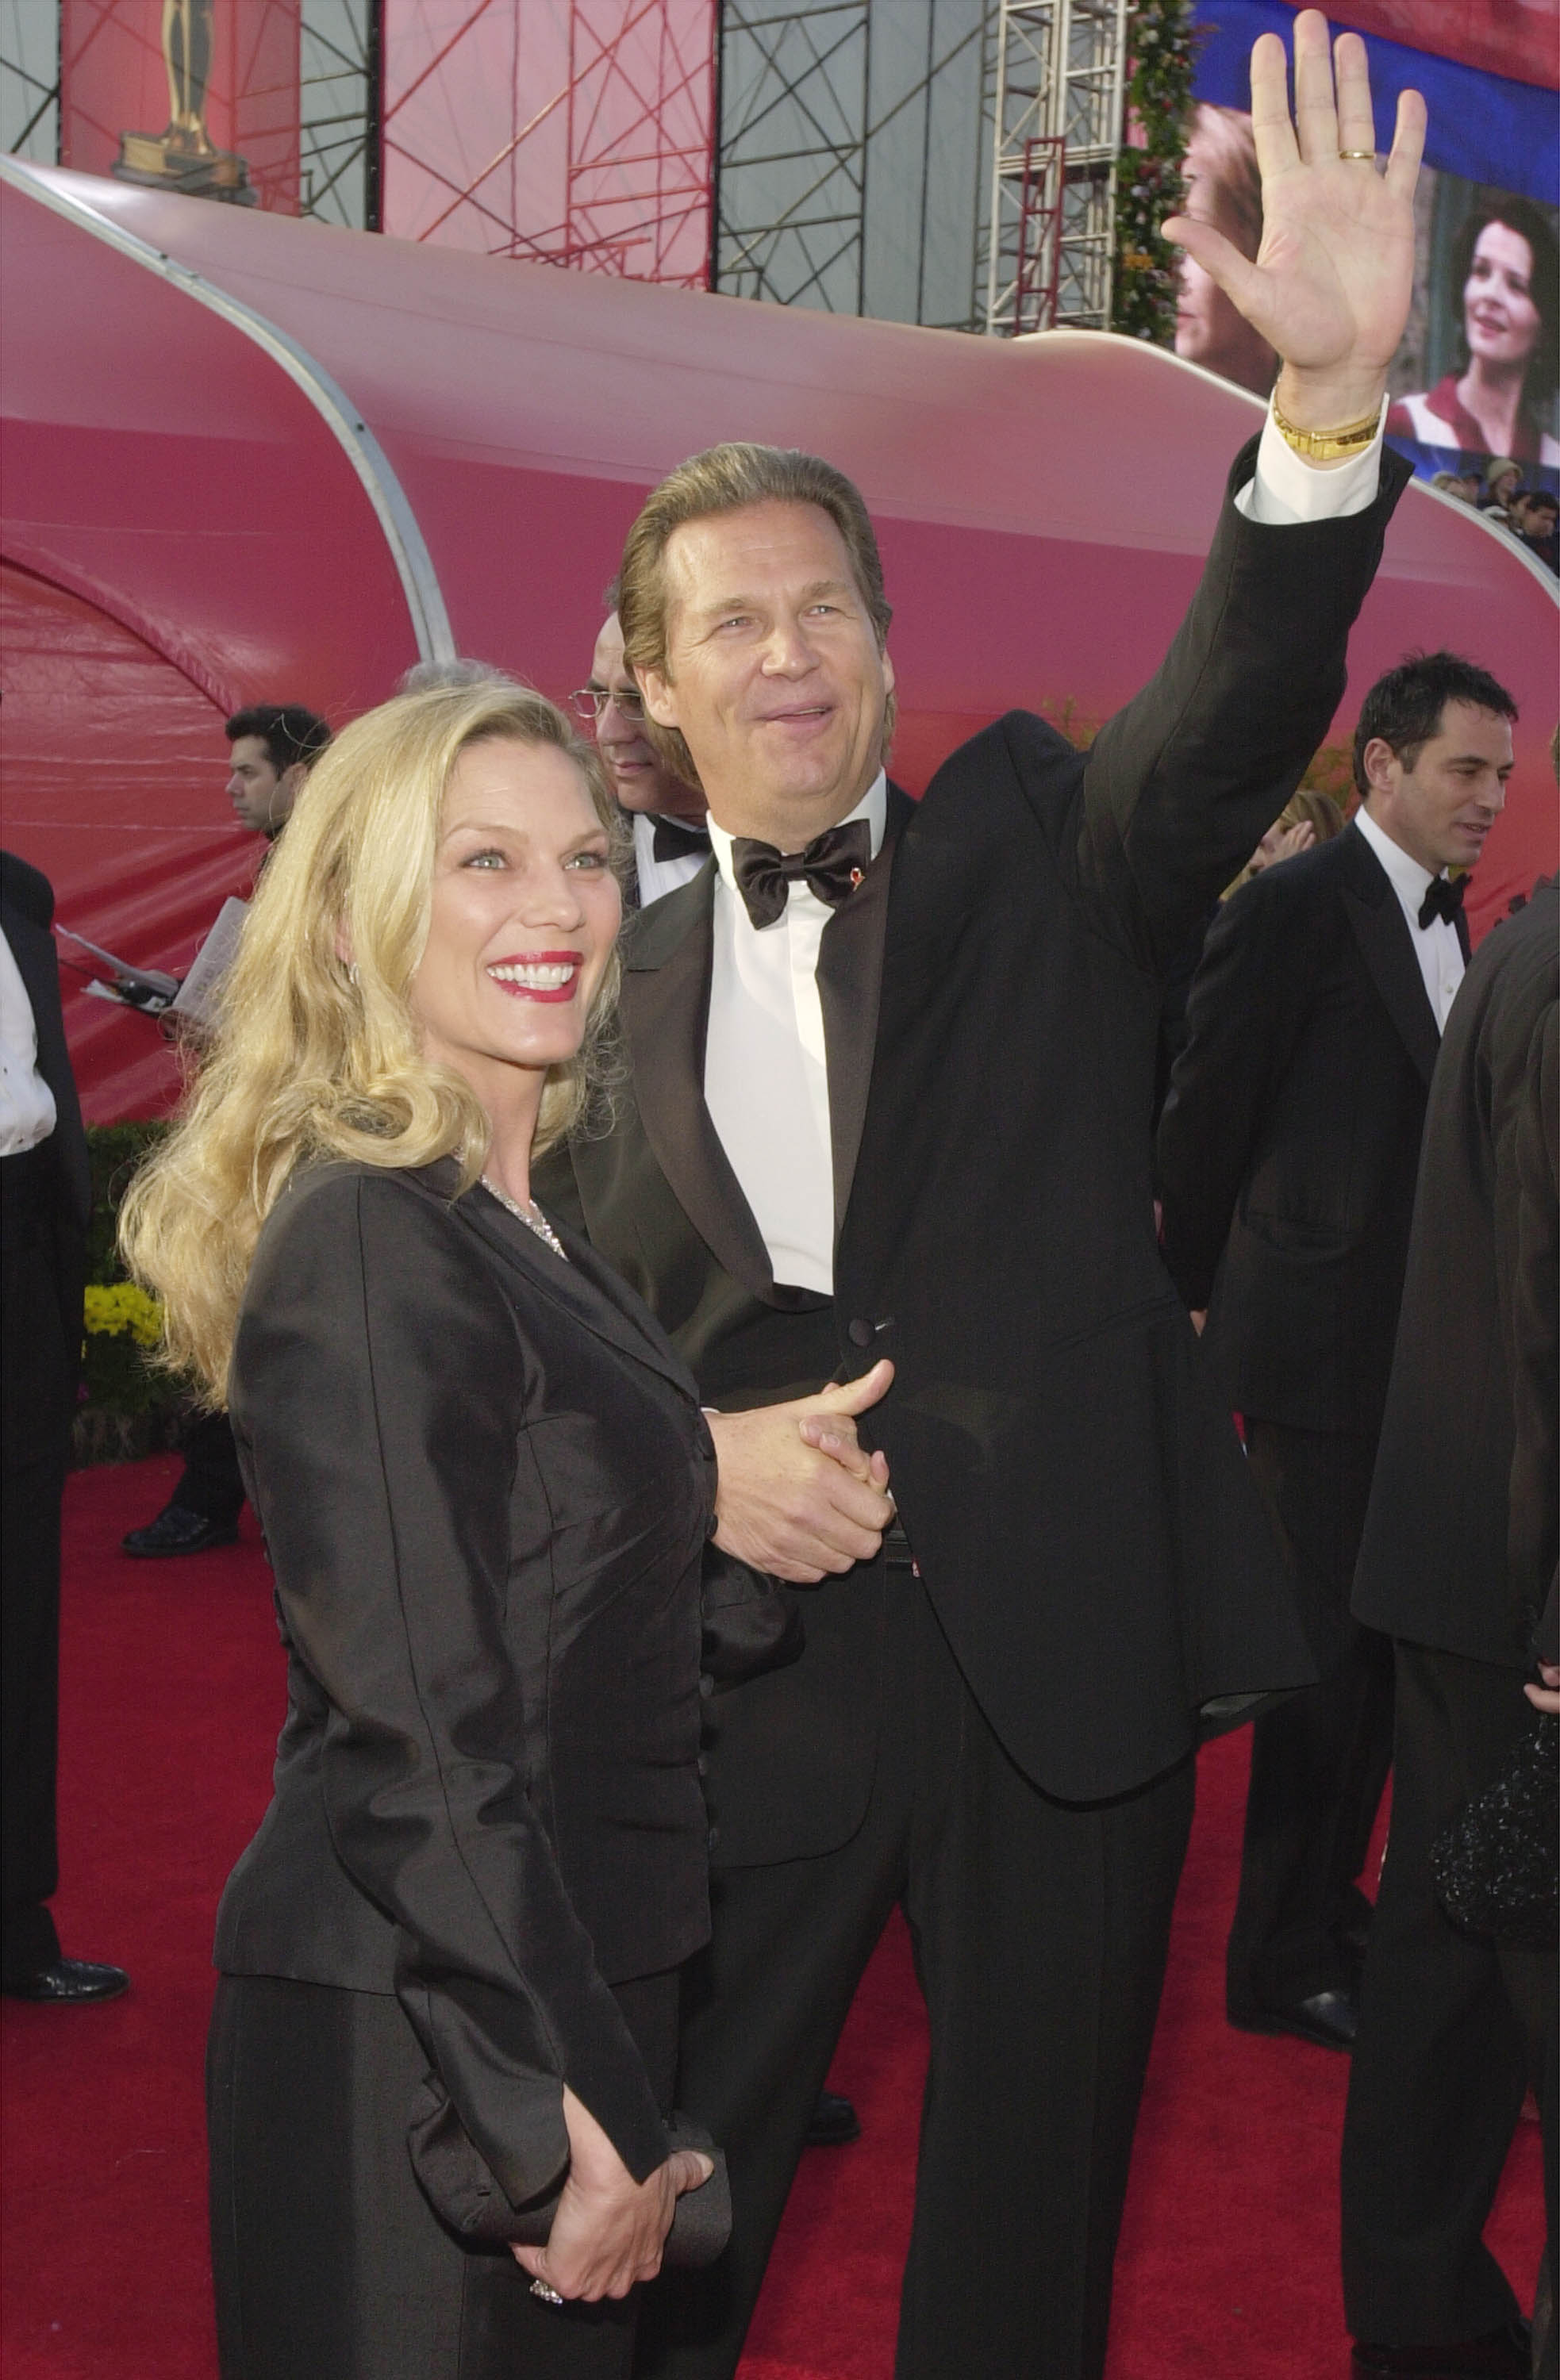 Actor Jeff Bridges and wife Susan Geston arrive for the 73rd Annual Academy Awards March 25, 2001 at the Shrine Auditorium in Los Angeles | Source: Getty Images